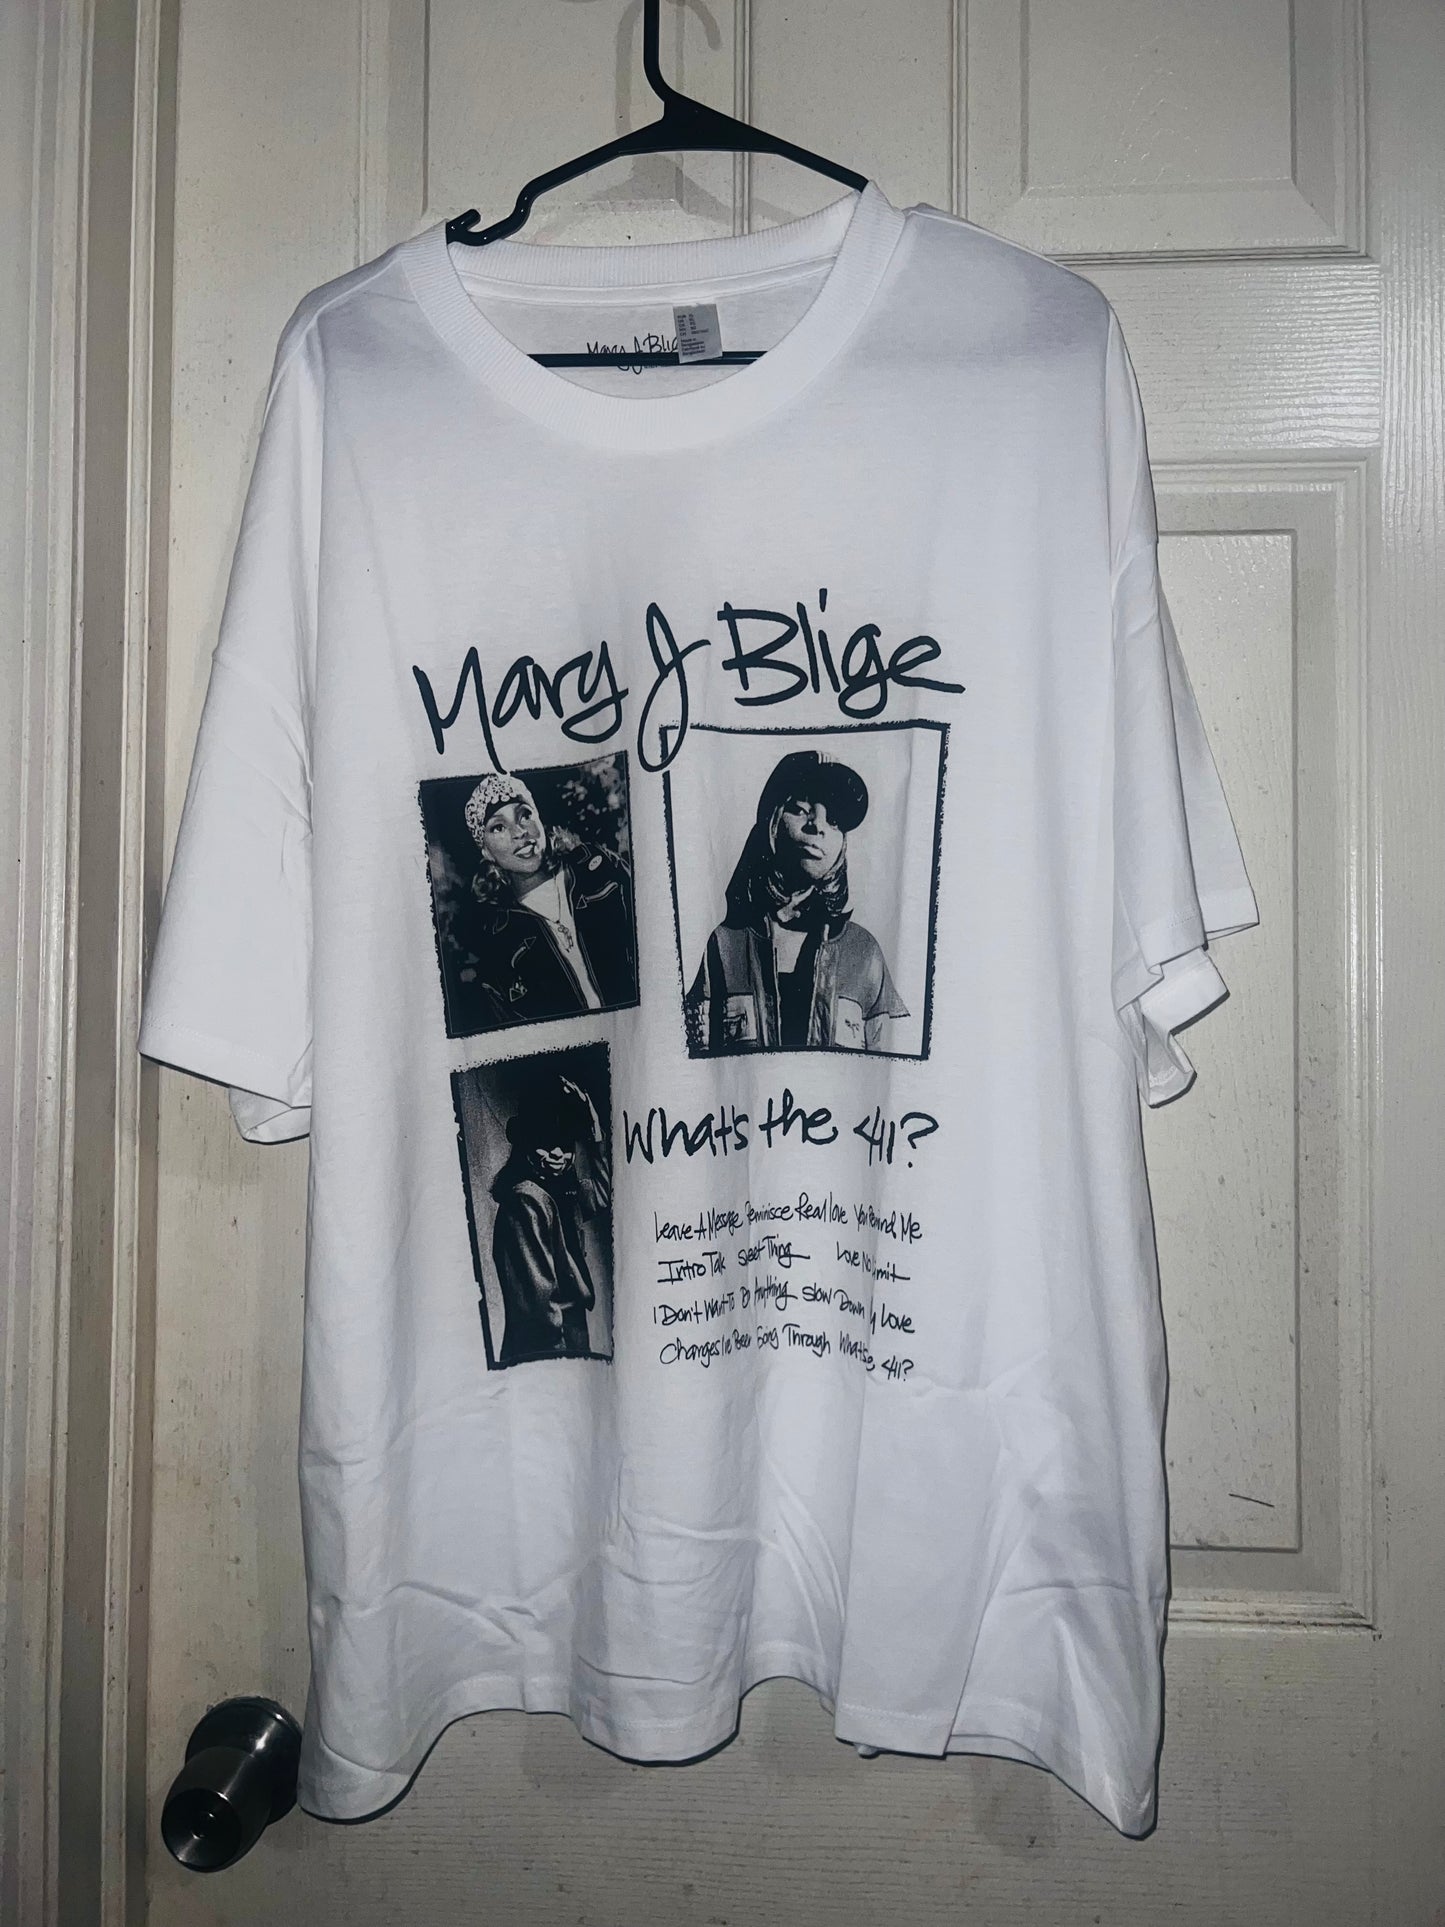 Mary J. Blige Oversized Distressed Tee